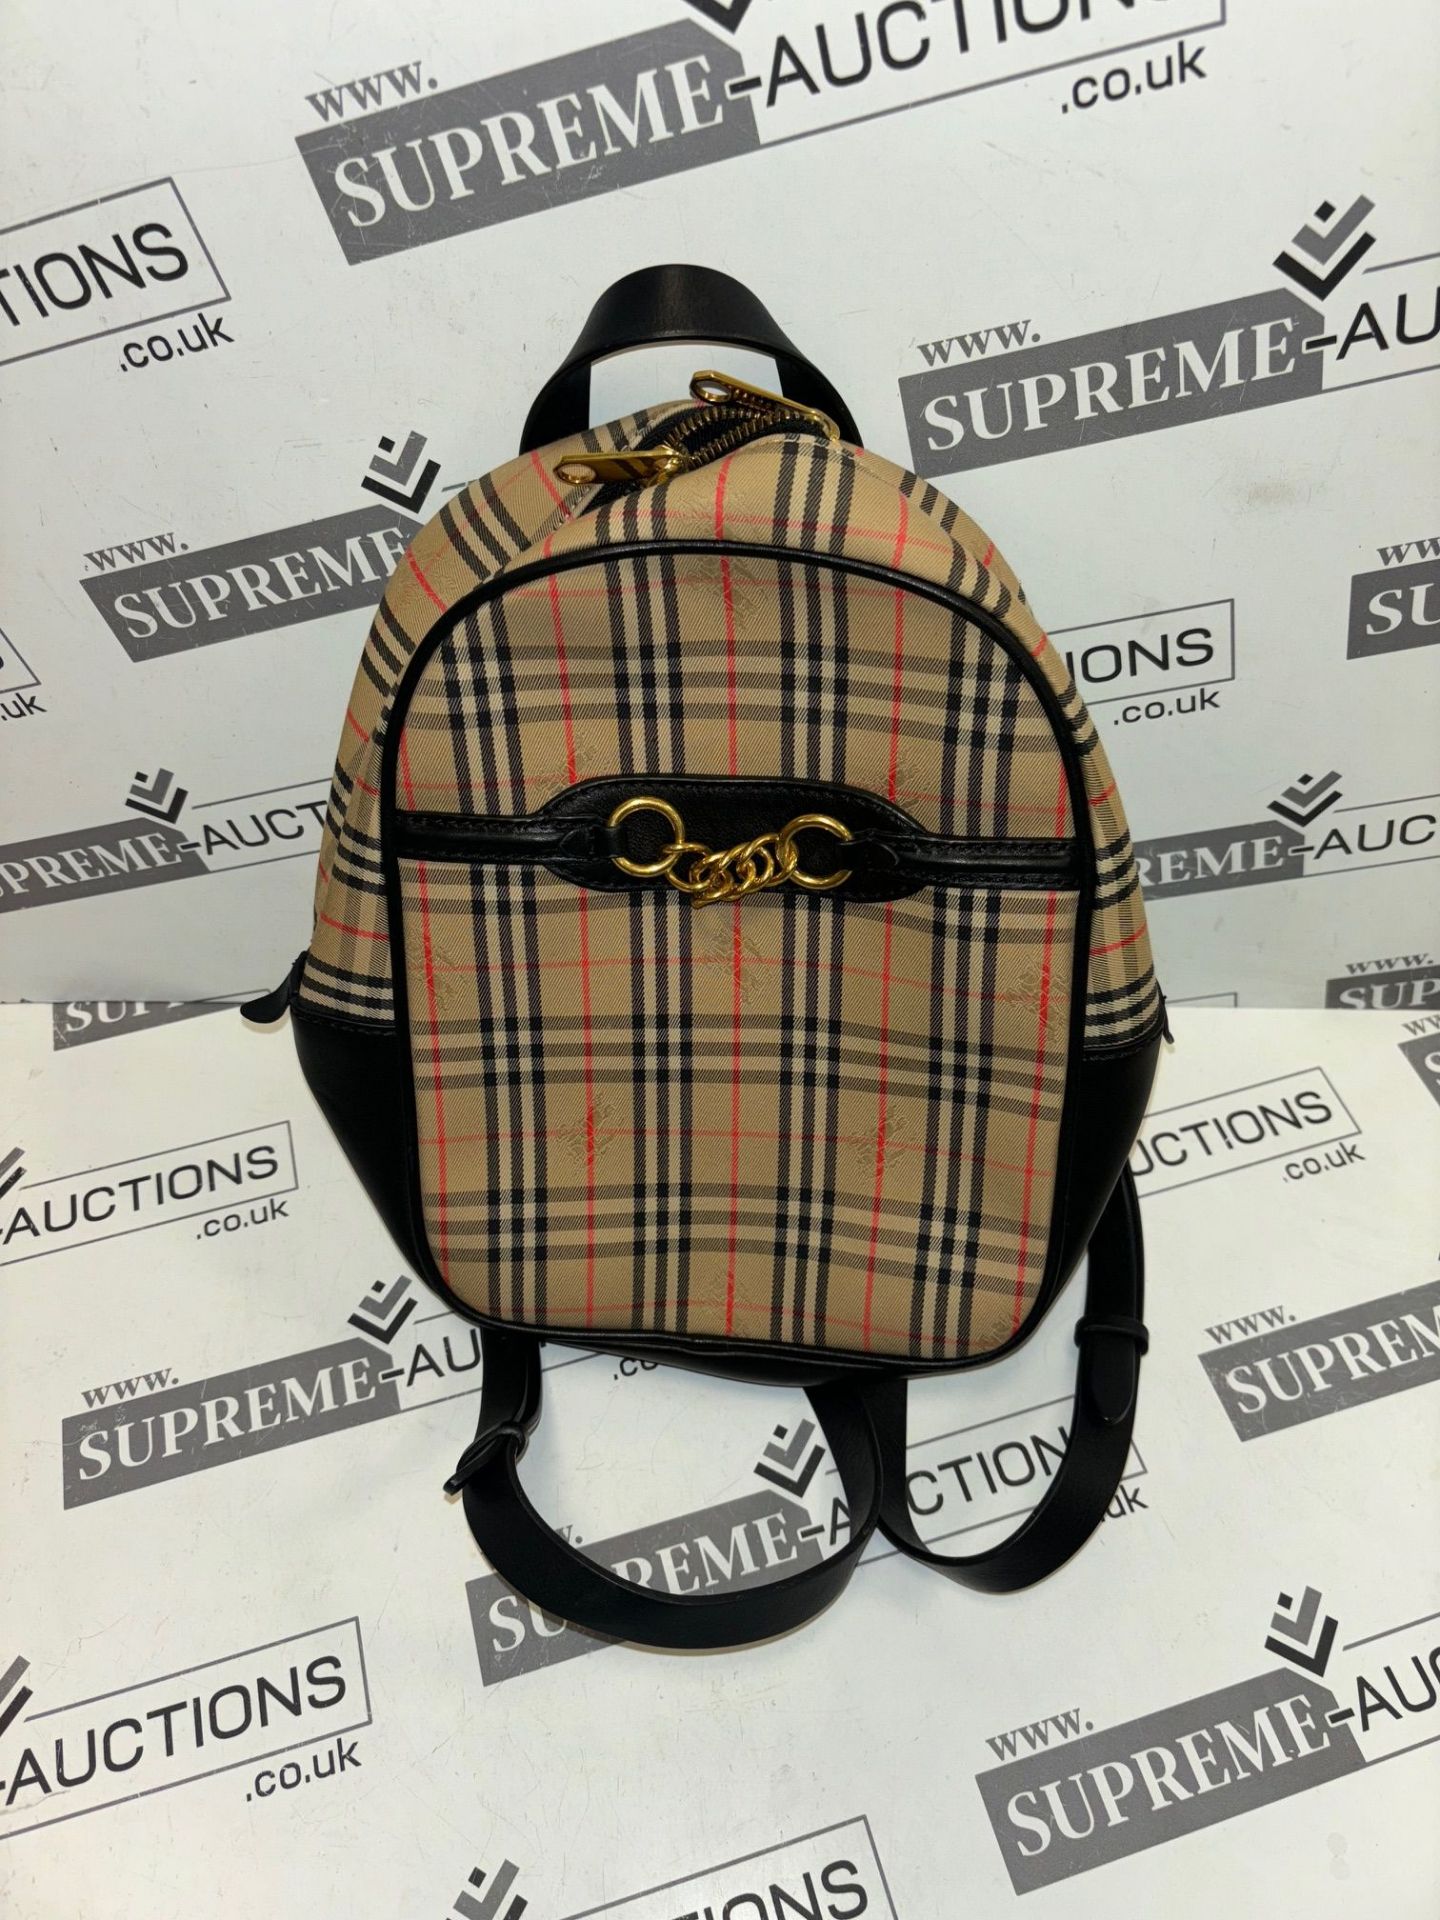 Burberry Link Backpack in Nova Check. 20x25cm. - Image 5 of 10